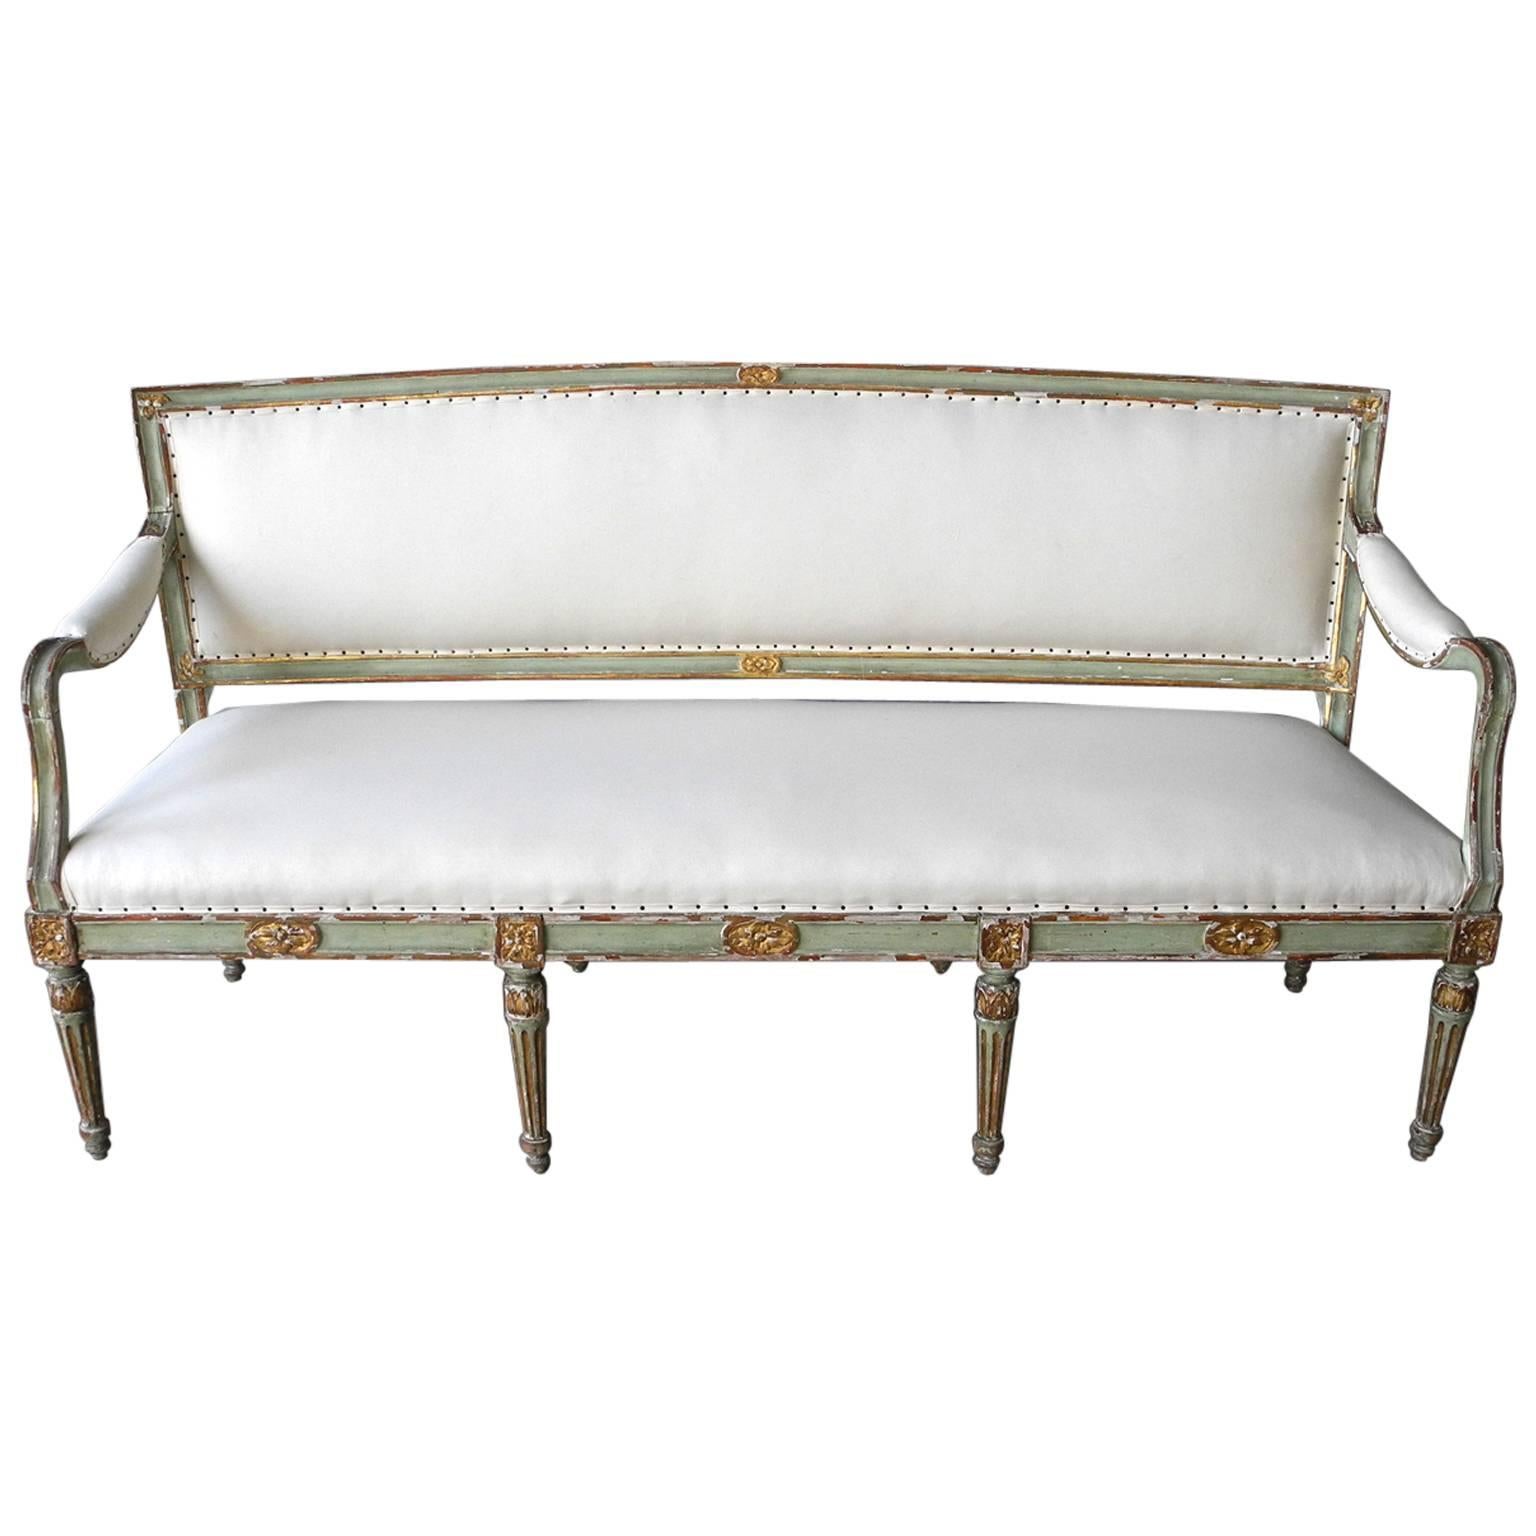 Antique, Reclaimed 18th Century Italian "Canape" Bench For Sale